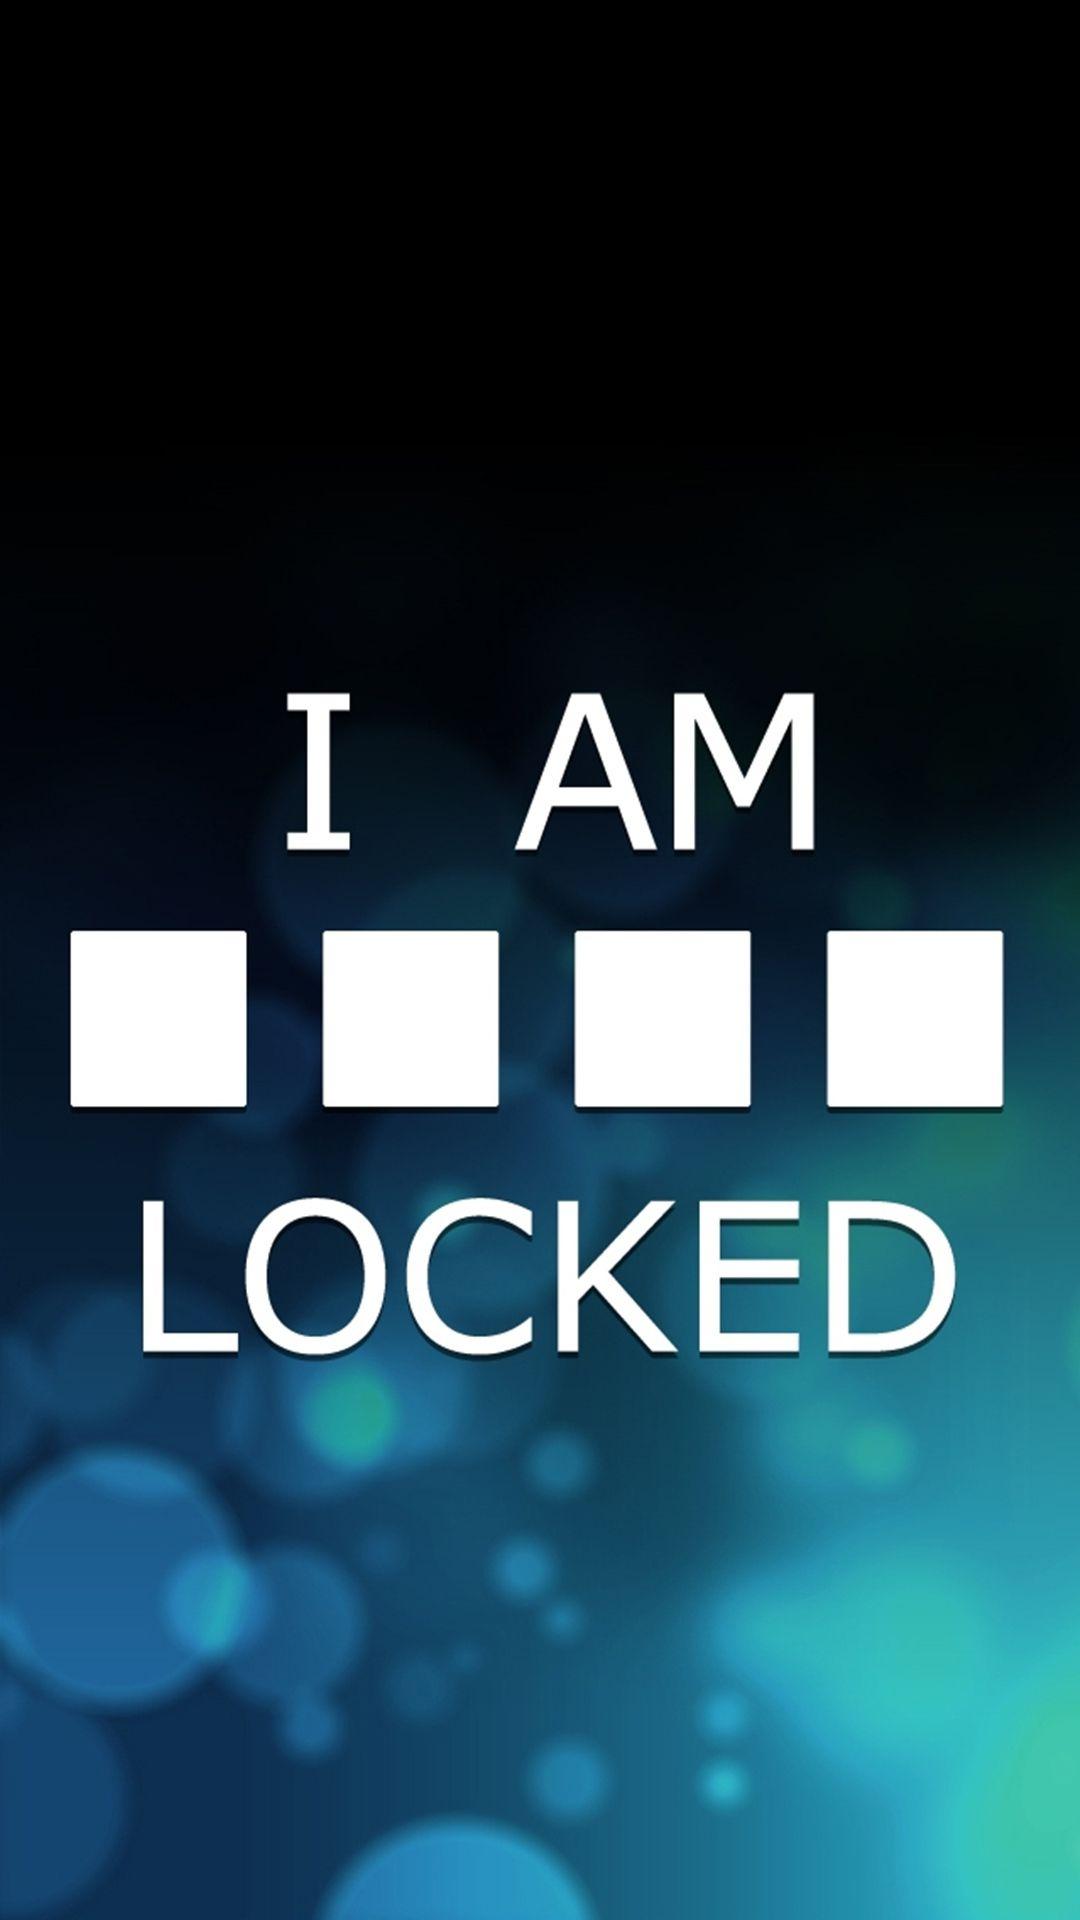 Locked System Hd Wallpapers